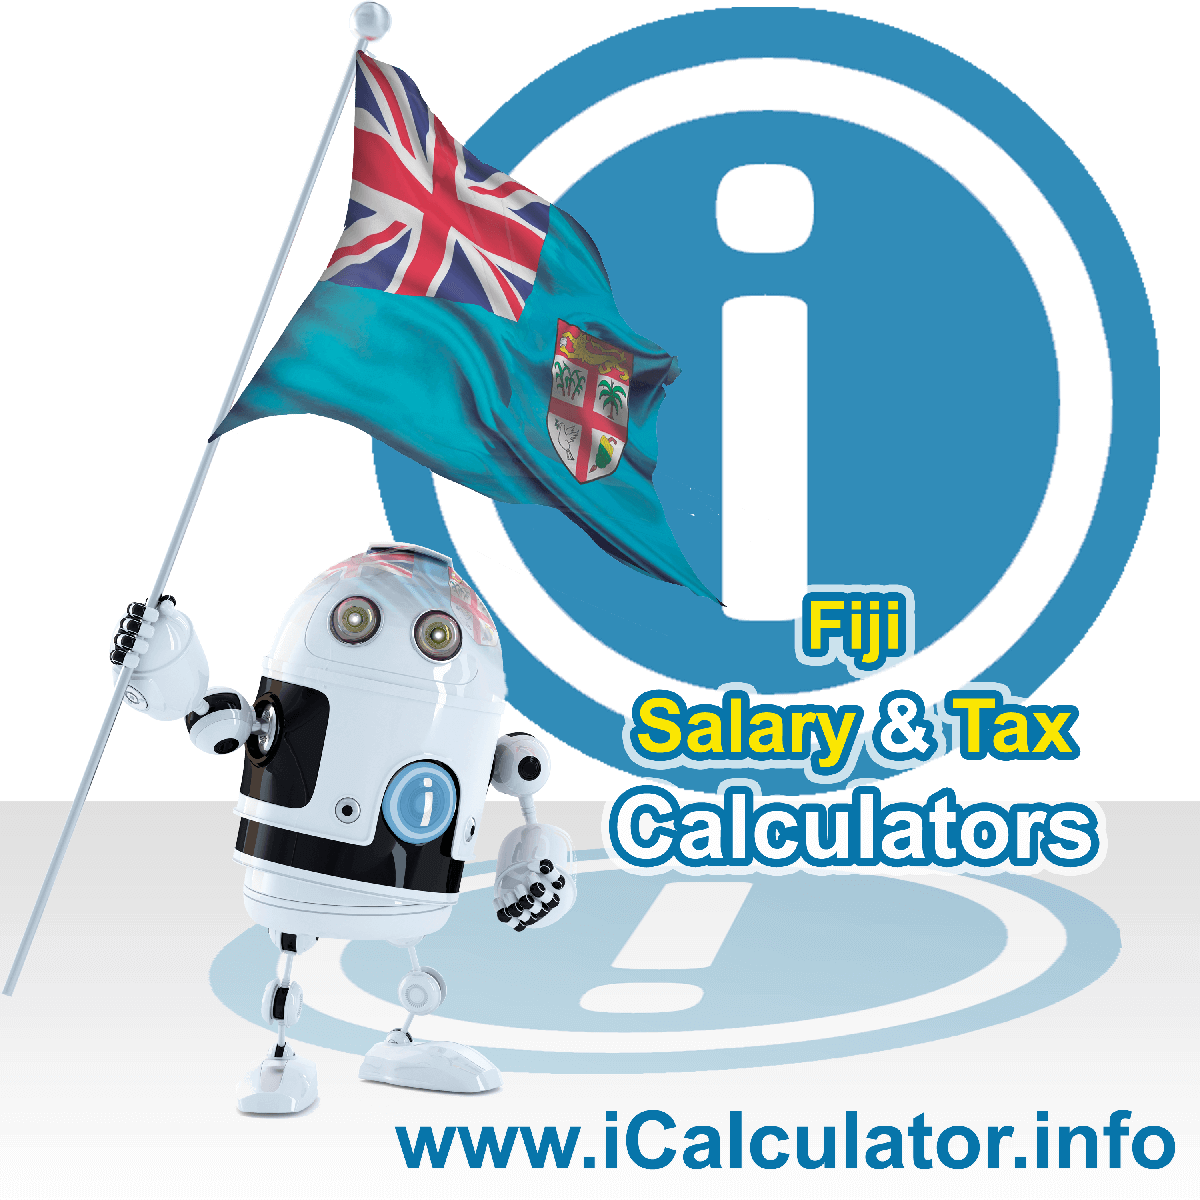 Fiji Tax Calculator. This image shows the Fiji flag and information relating to the tax formula for the Fiji Salary Calculator